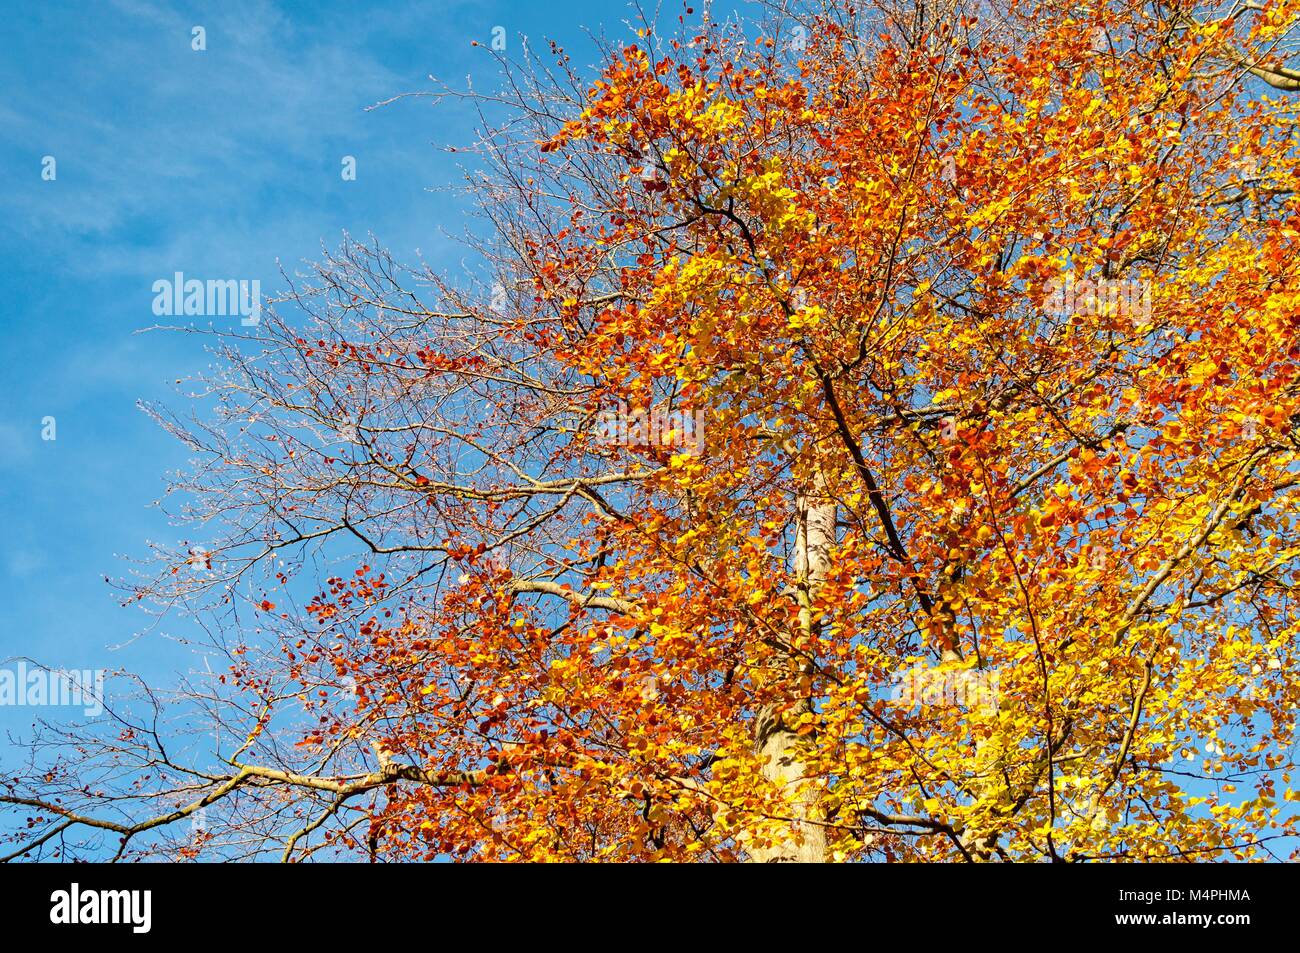 Orange and yellow leaves on a tree in autumn Stock Photo